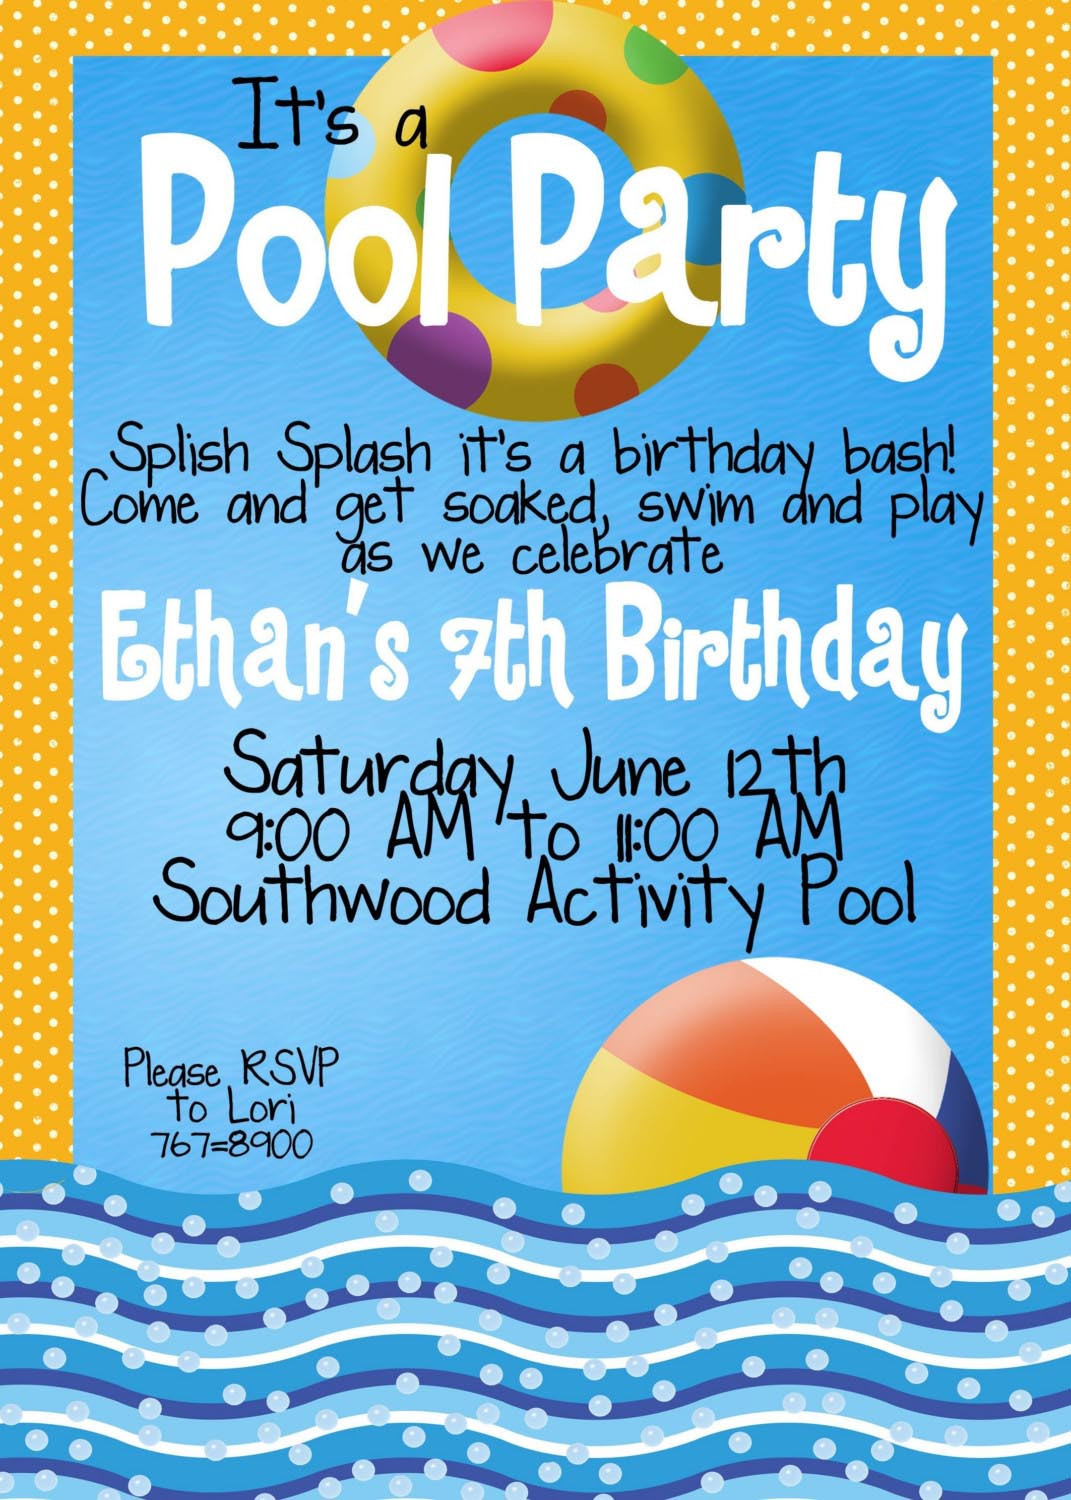 Pool Party Invitations Ideas
 The Perfect Kids Pool Party